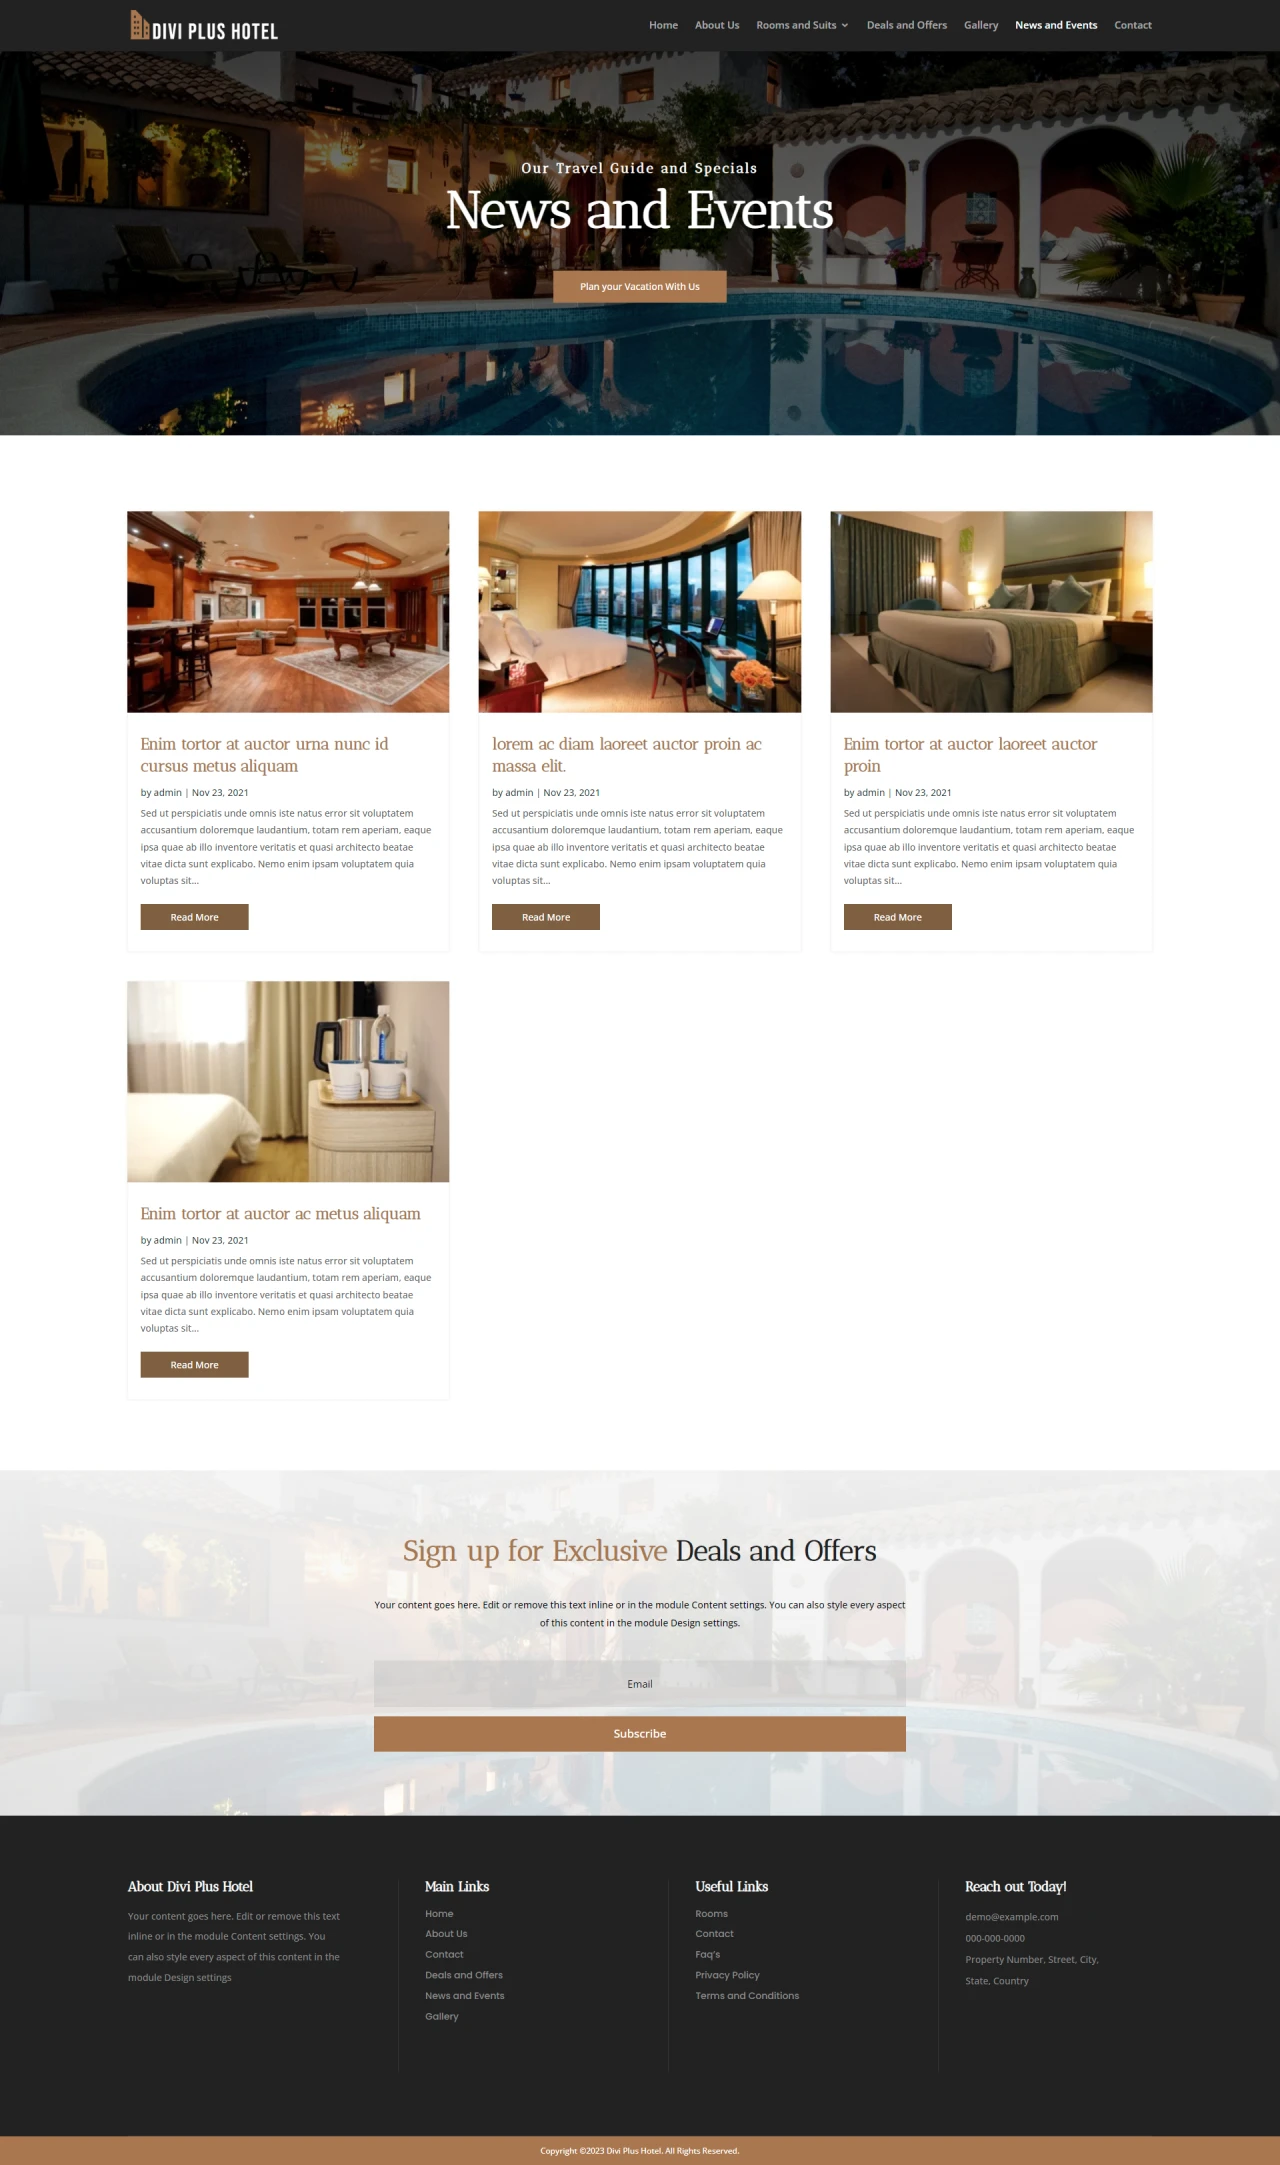 Divi Plus Hotel Child Theme News and Events